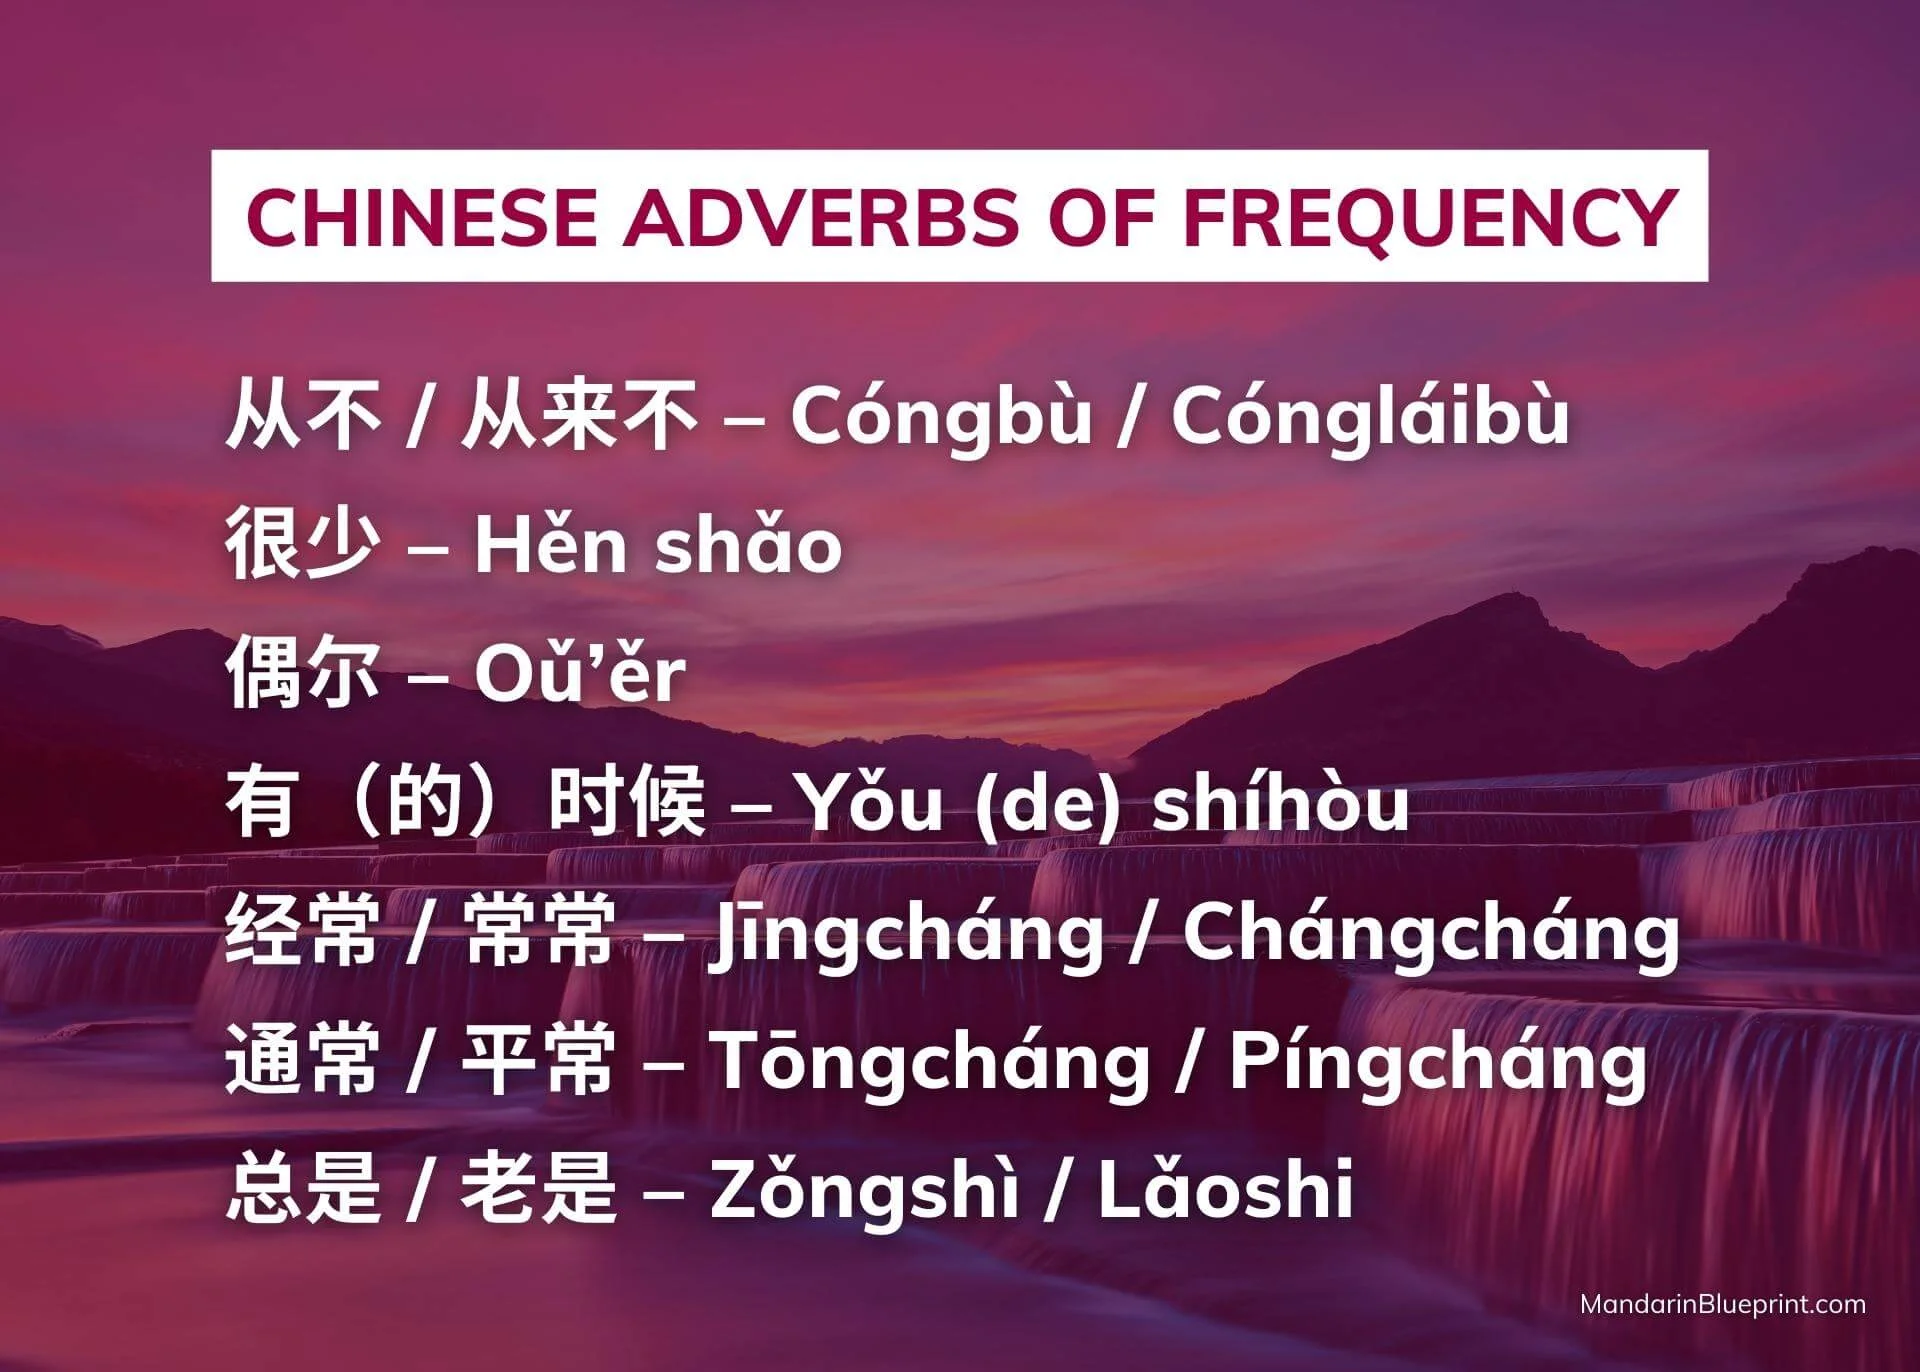 Chinese adverbs of frequency